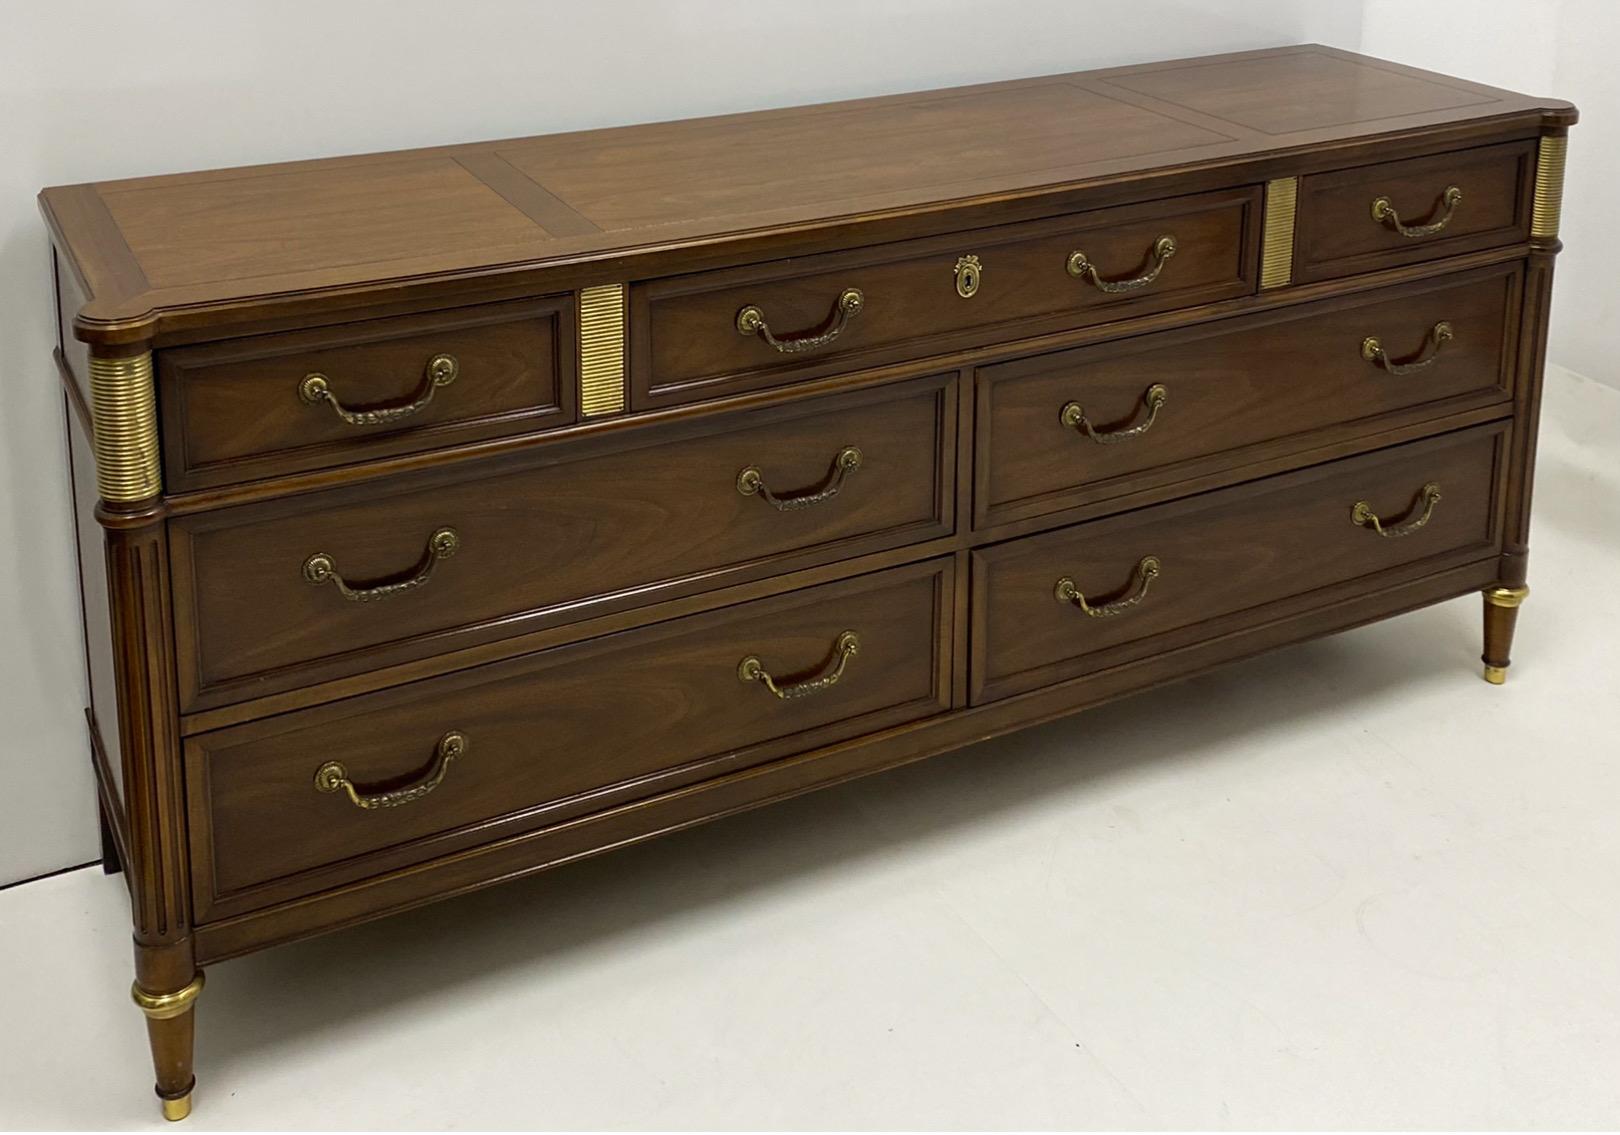 This is a lovely Louis XVI style mahogany commode or long chest of drawers by Baker Furniture. It is marked and in very good condition. The piece dates to the 1970s.